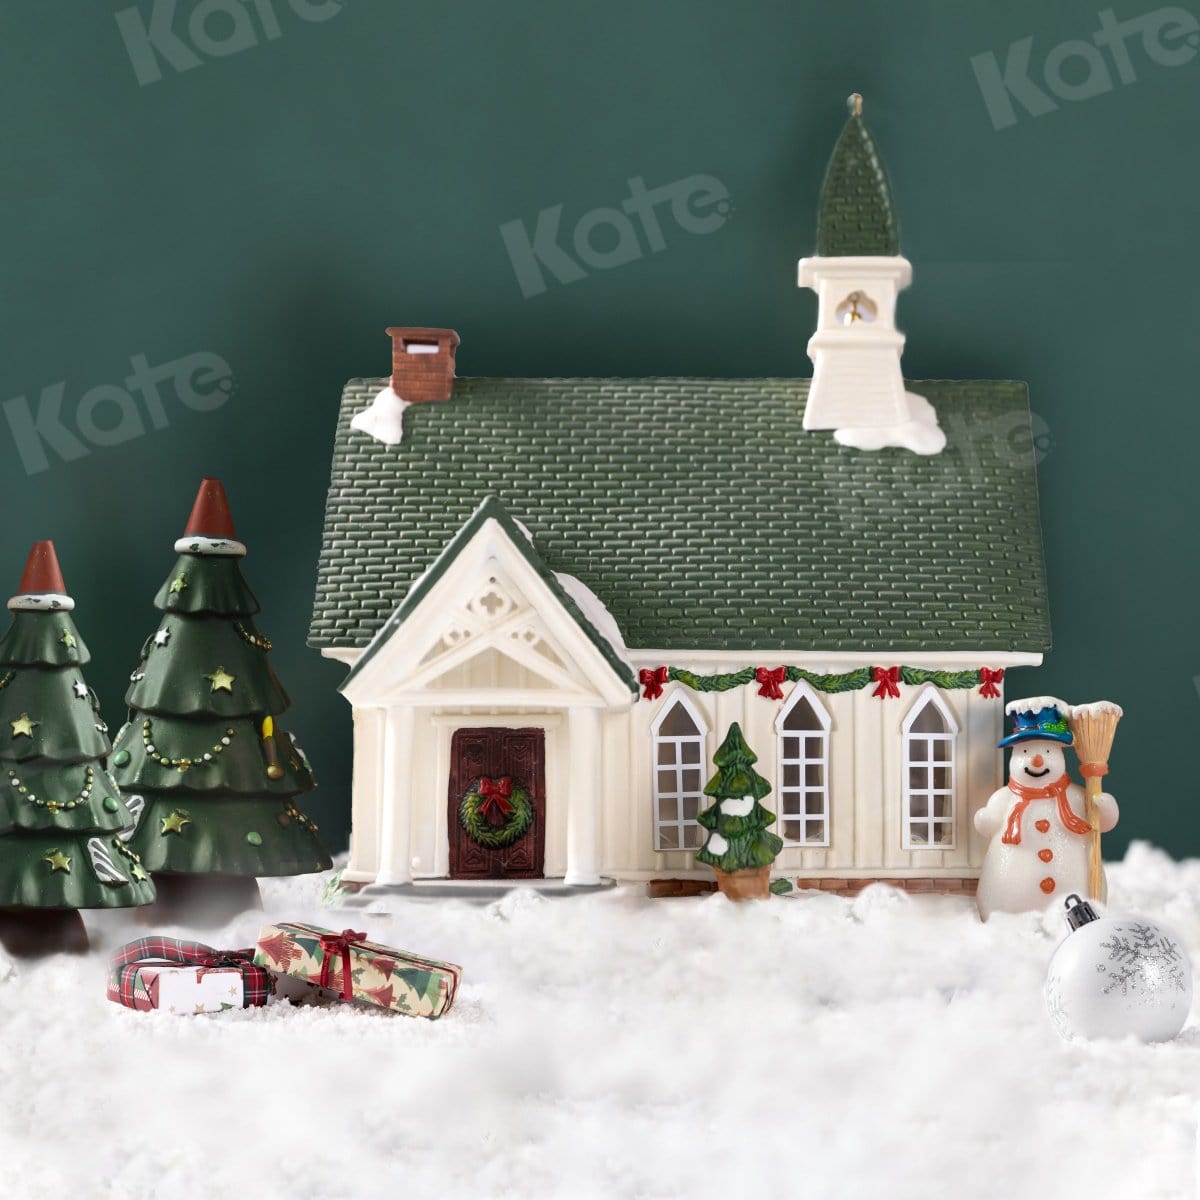 Kate Christmas House Winter Hot Cocoa Backdrop for Photography